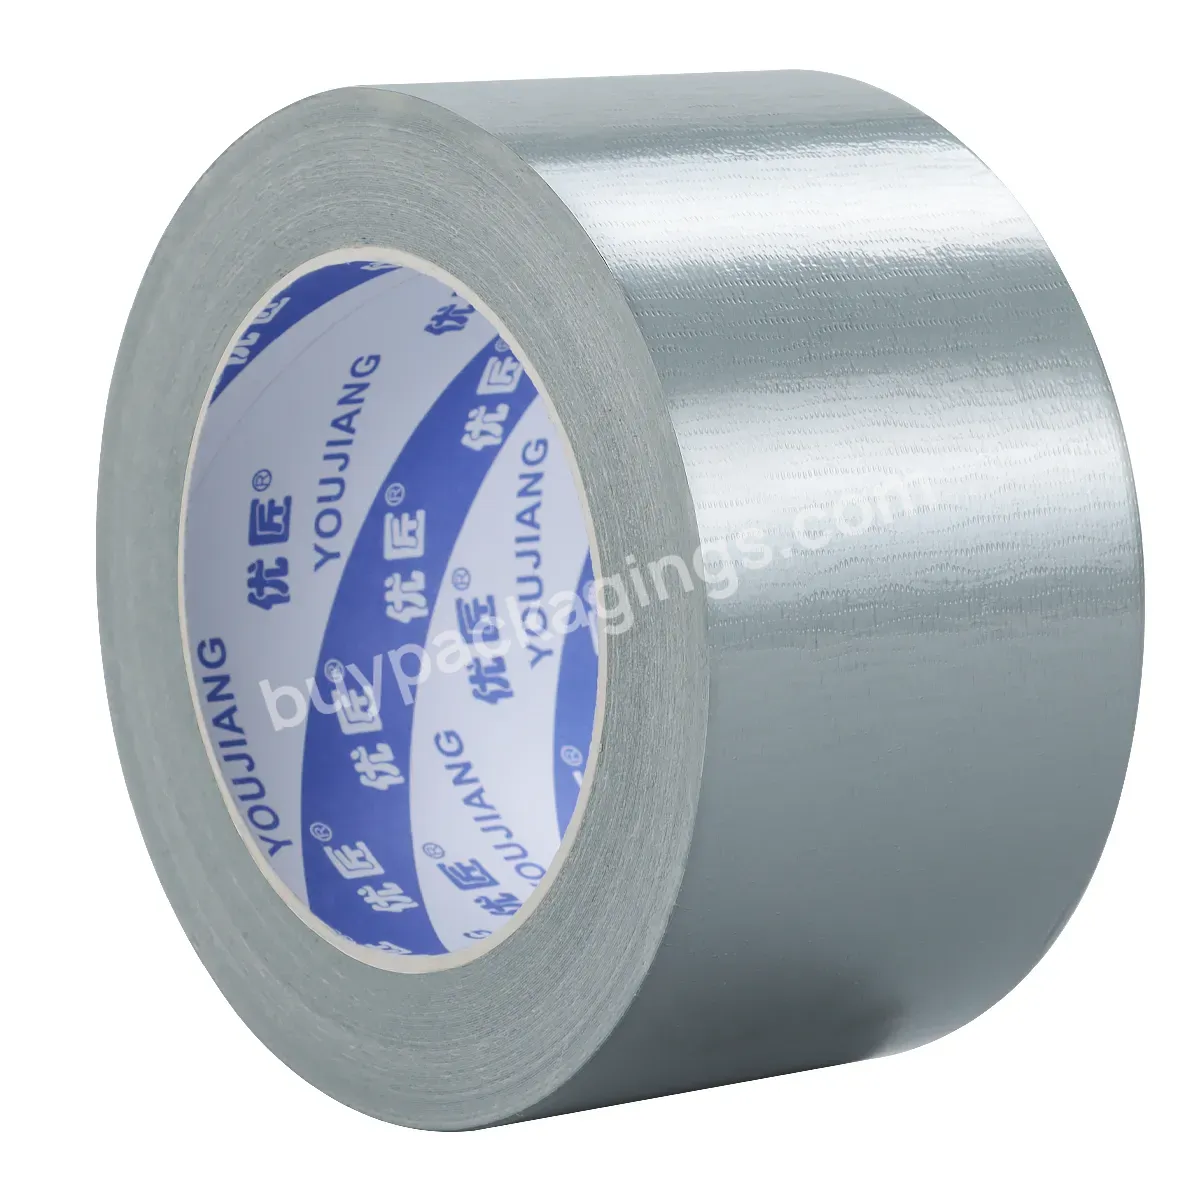 You Jiang Spray Painting Pe Material Stucco Tape Tuck Tape No Residue Hand Tear Rubber Duct Tank Tape - Buy Tuck Tape,Adhesive For Tuck Tape,Tape Tuck.